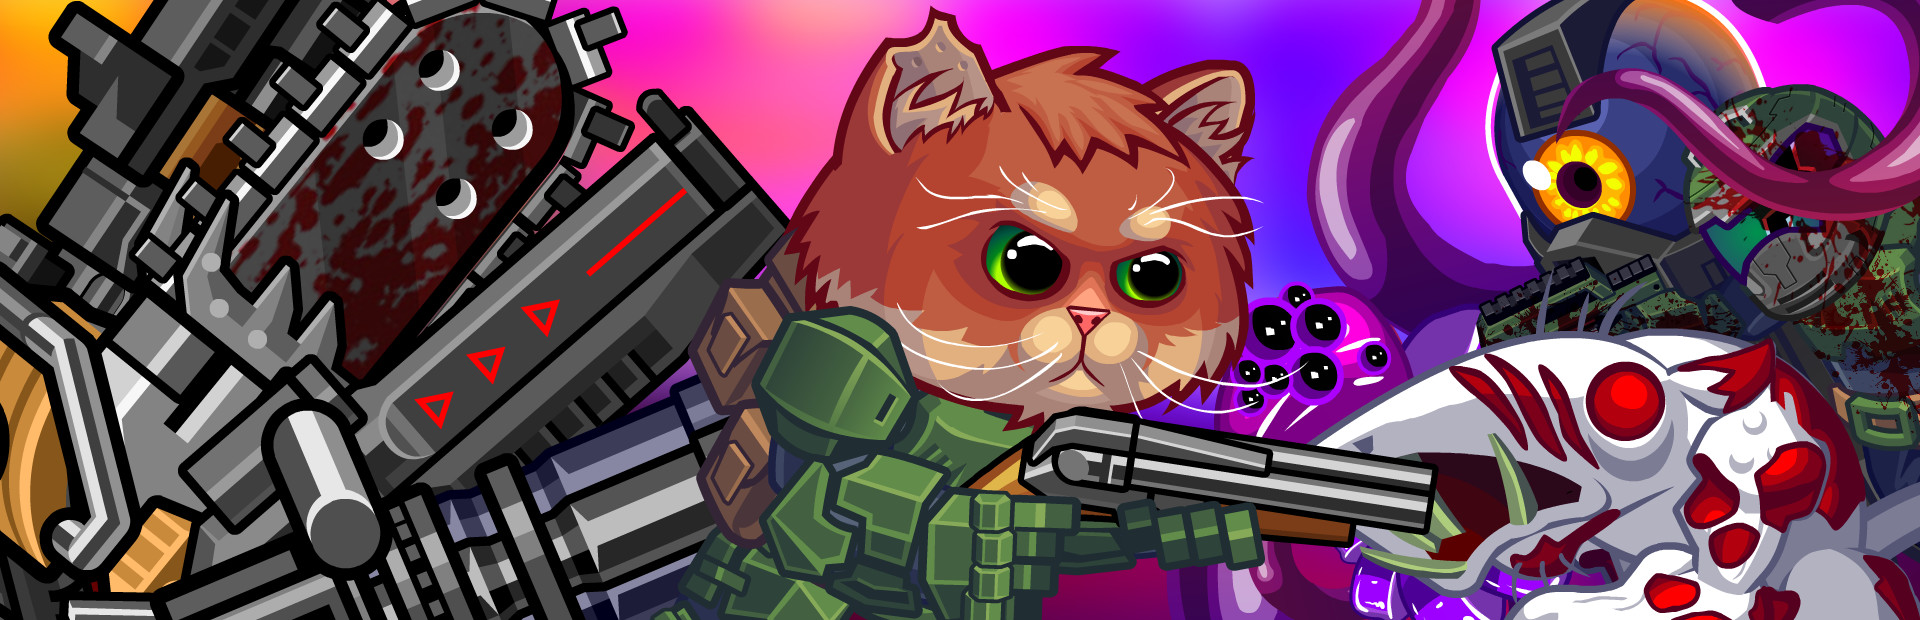 ARMORED KITTEN cover image